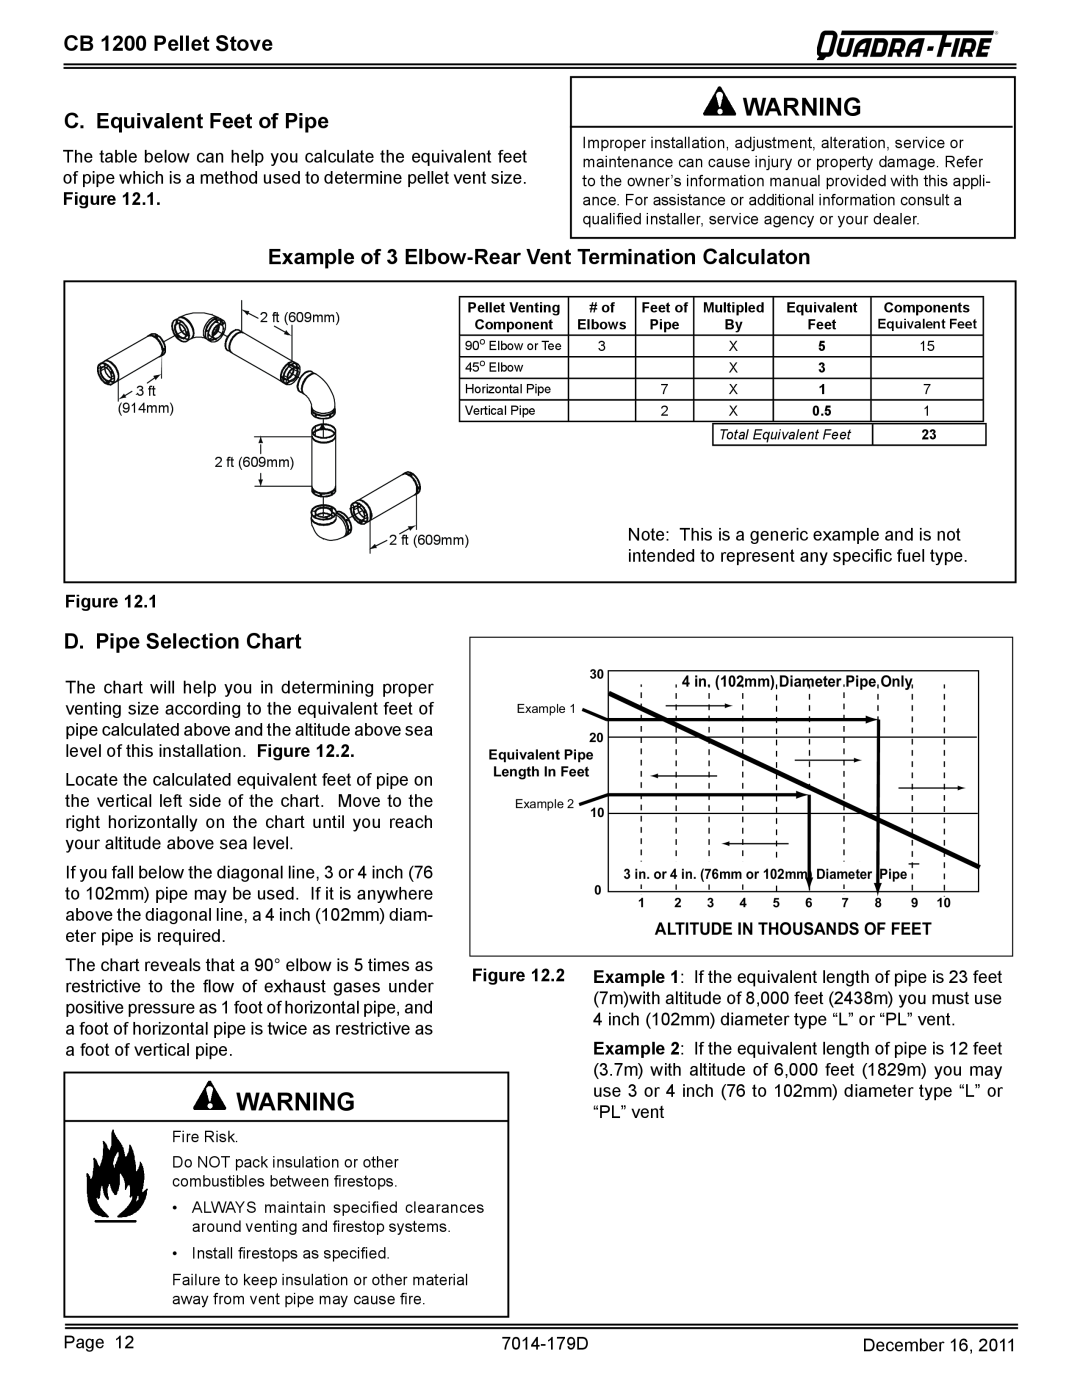 Quadra-Fire CB1200M-MBK owner manual C. Equivalent Feet of Pipe, D. Pipe Selection Chart, CB 1200 Pellet Stove 